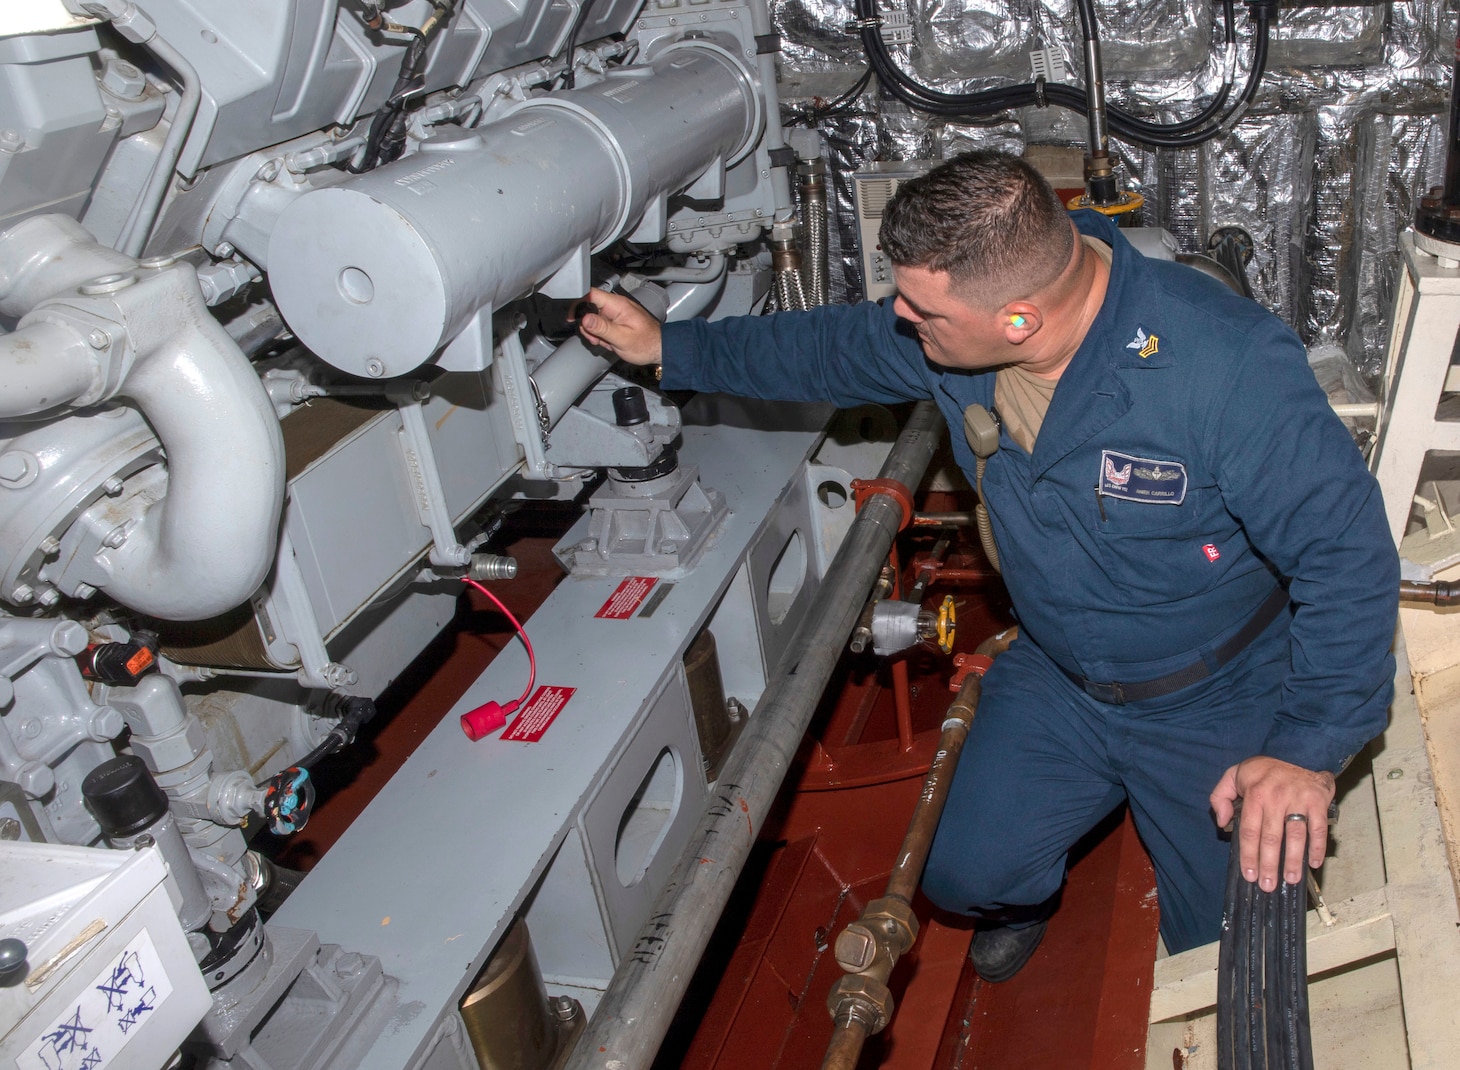 Engineman 1st Class Anier Carrillo checks the fitting of a 3D-printed valve aboard the Freedom-variant littoral combat ship USS Indianapolis (LCS 17) at Mayport Naval Station, Fla.